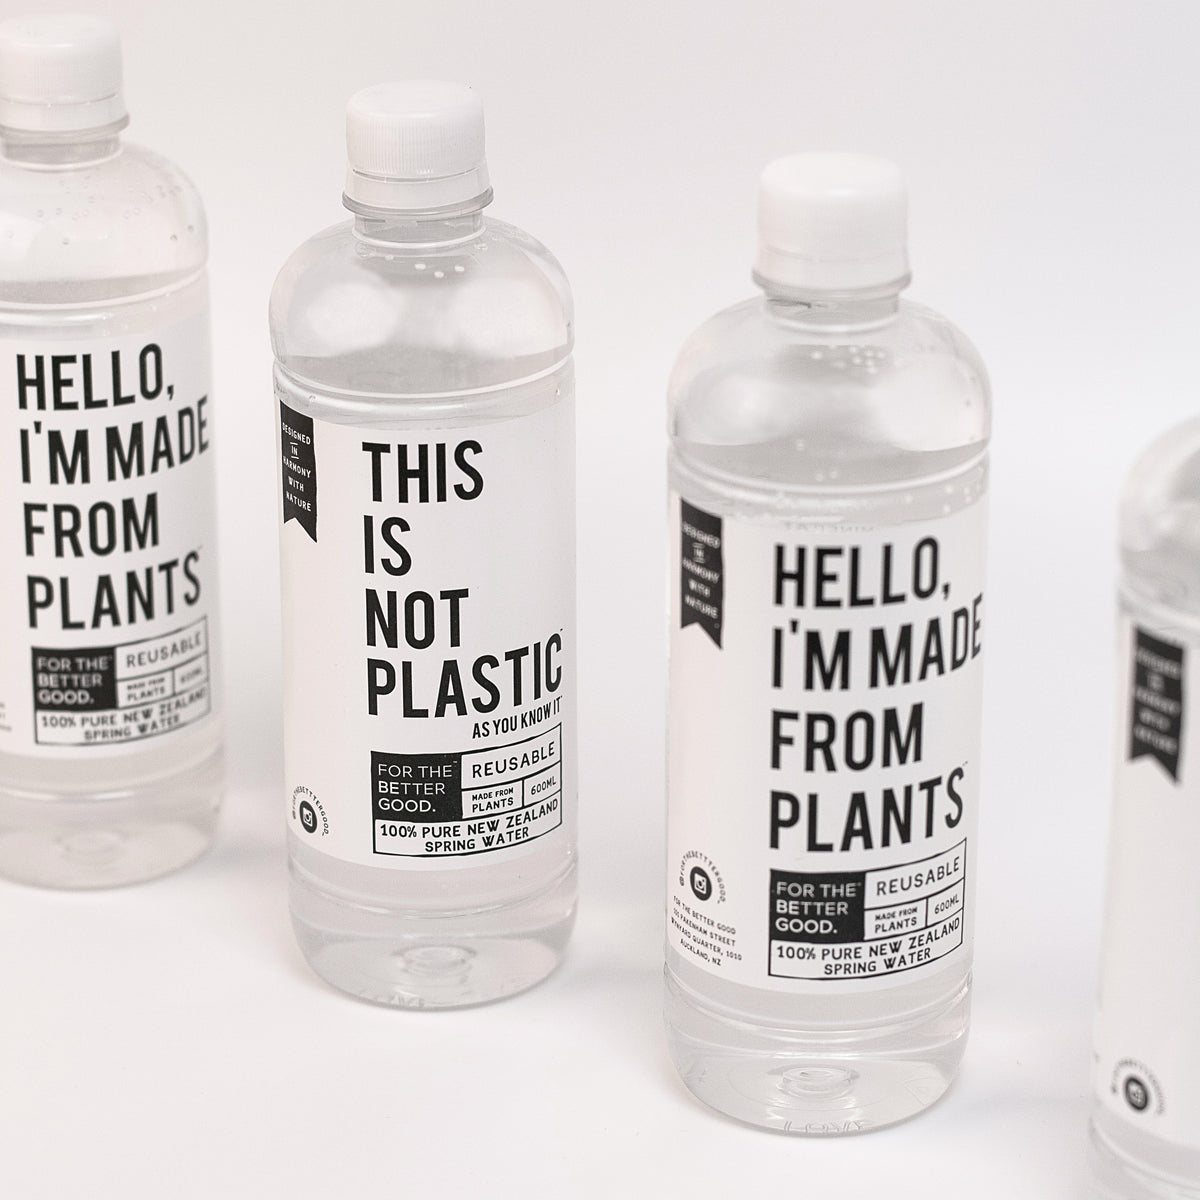 JUST water bottle now includes plant-based materials